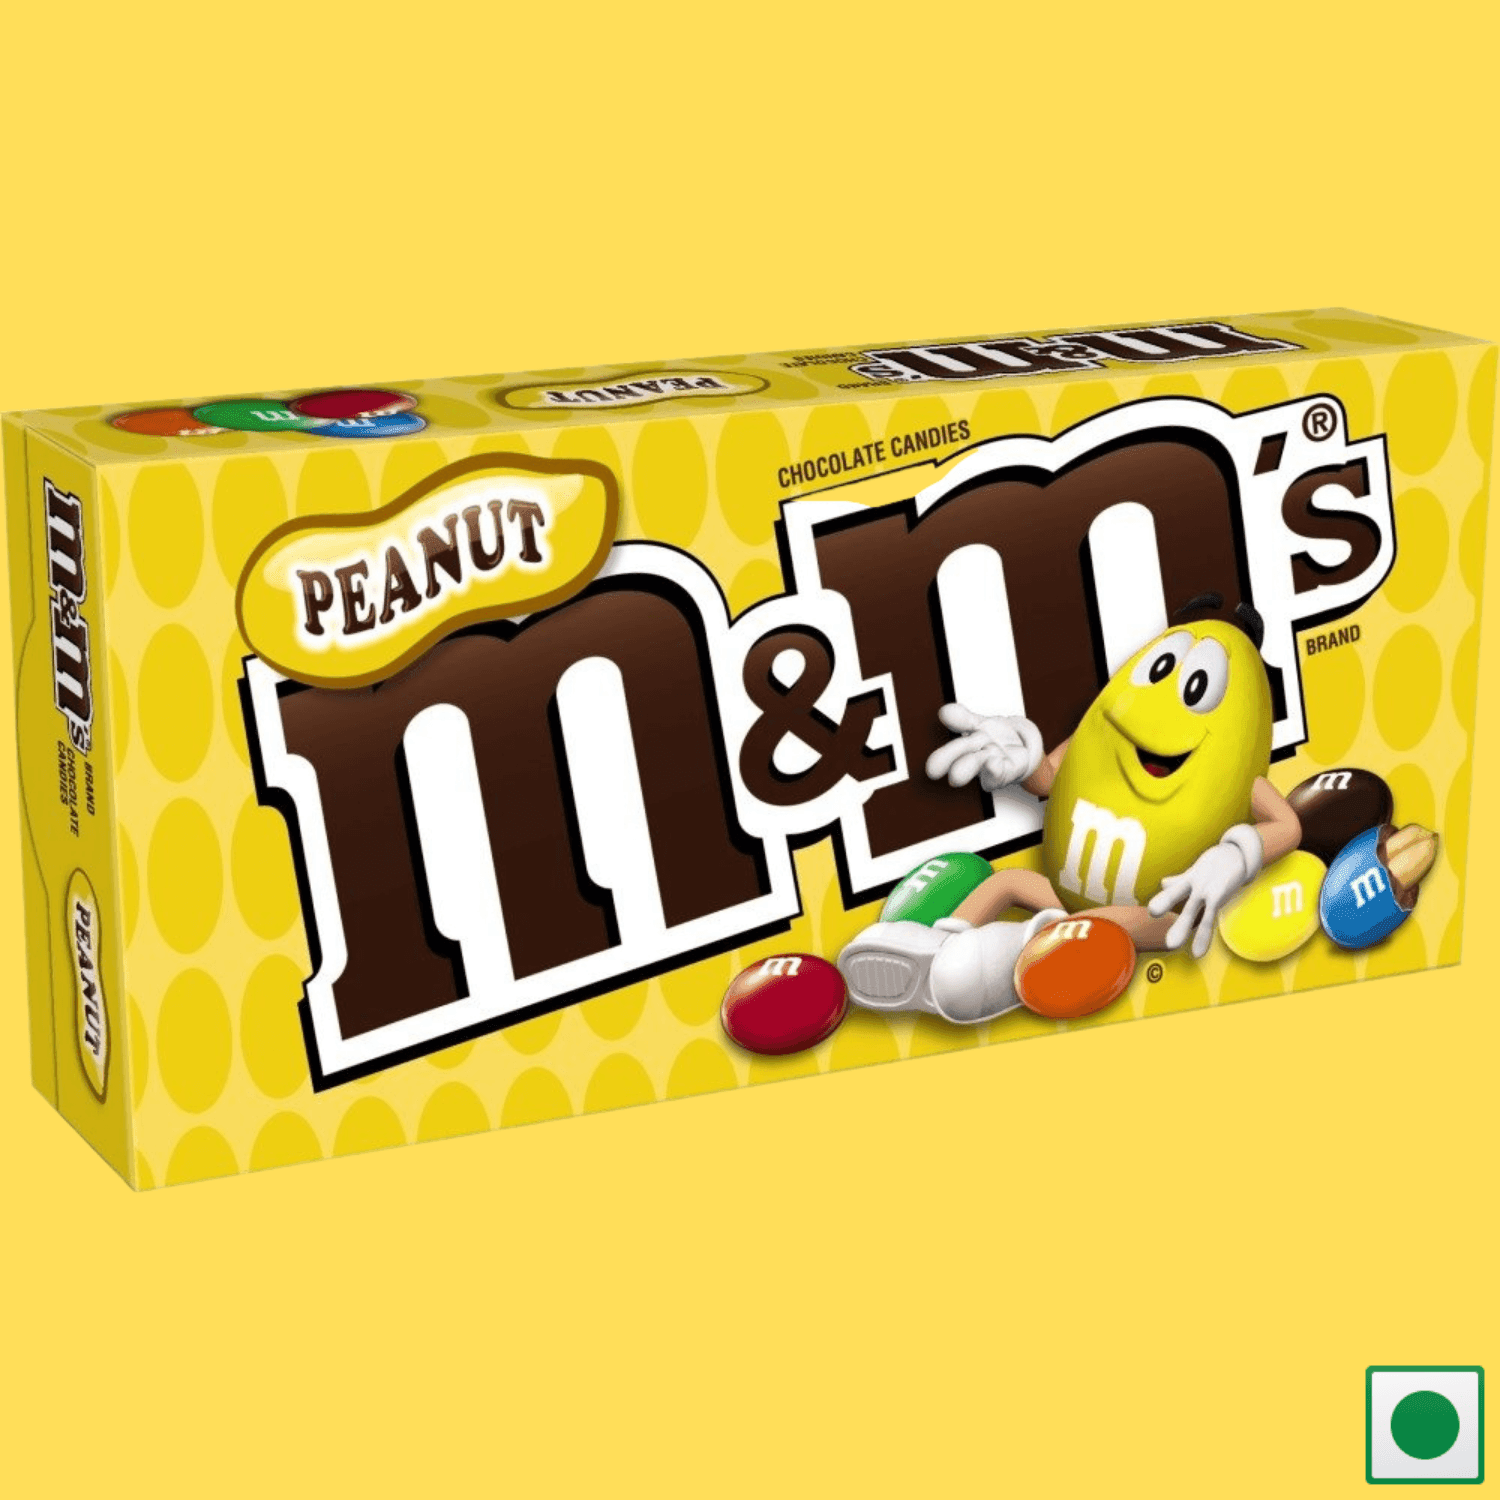 M&Ms Peanut Chocolate Candy Theater Box, 87.9g (Imported) - Super 7 Mart